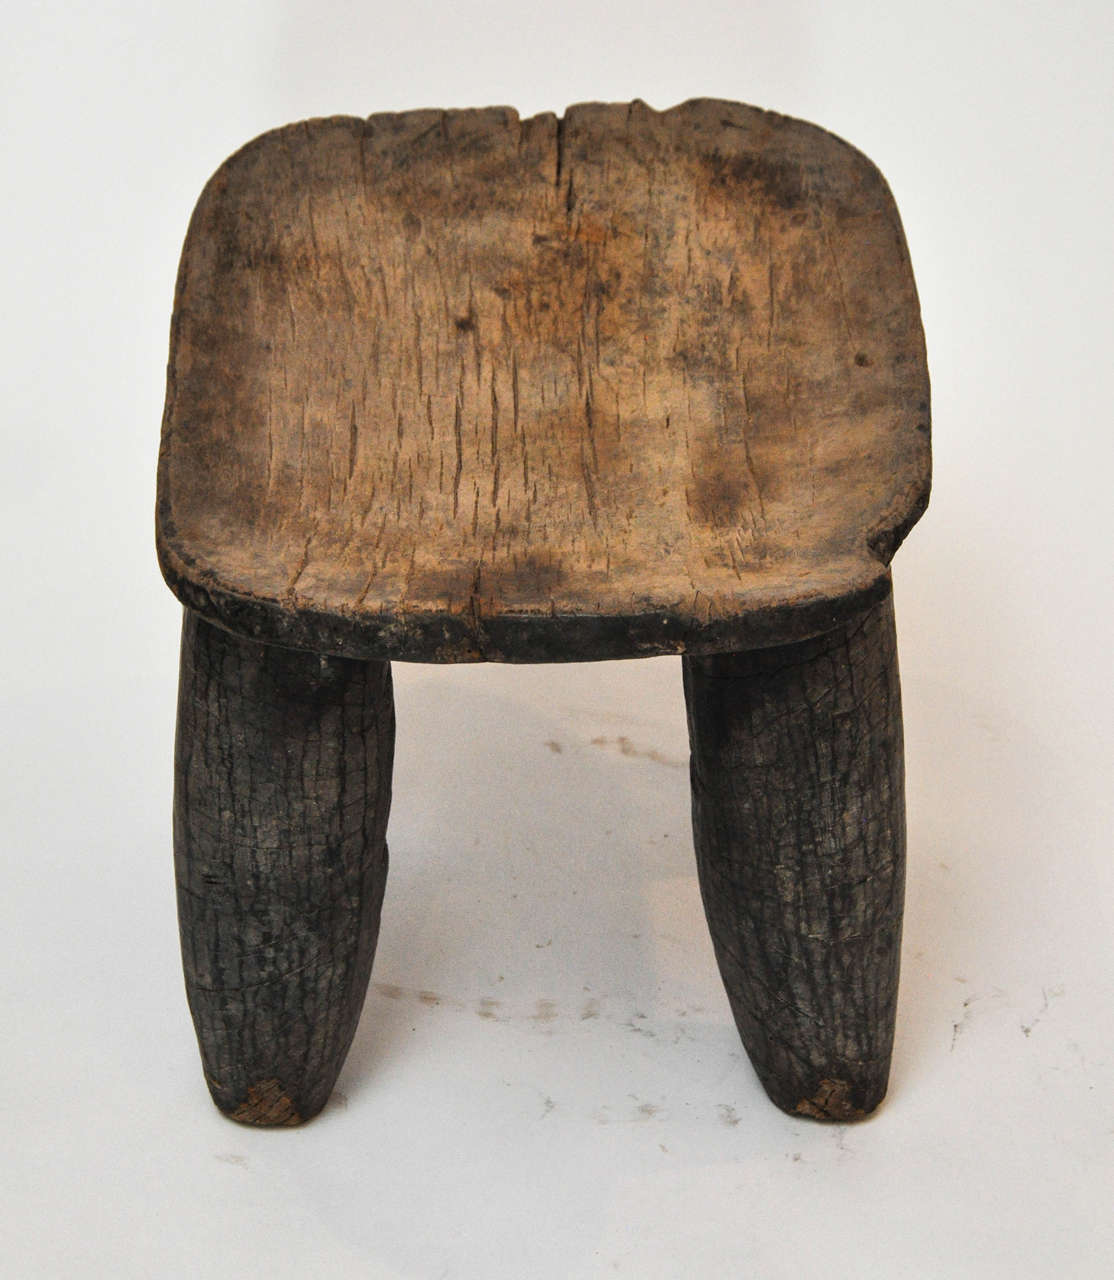 Beautifully worn stool with charm. Legs are done with a gorgeous Rustic Feel. Senufo spans from Mali to Katiola in Cote d'Ivoire.